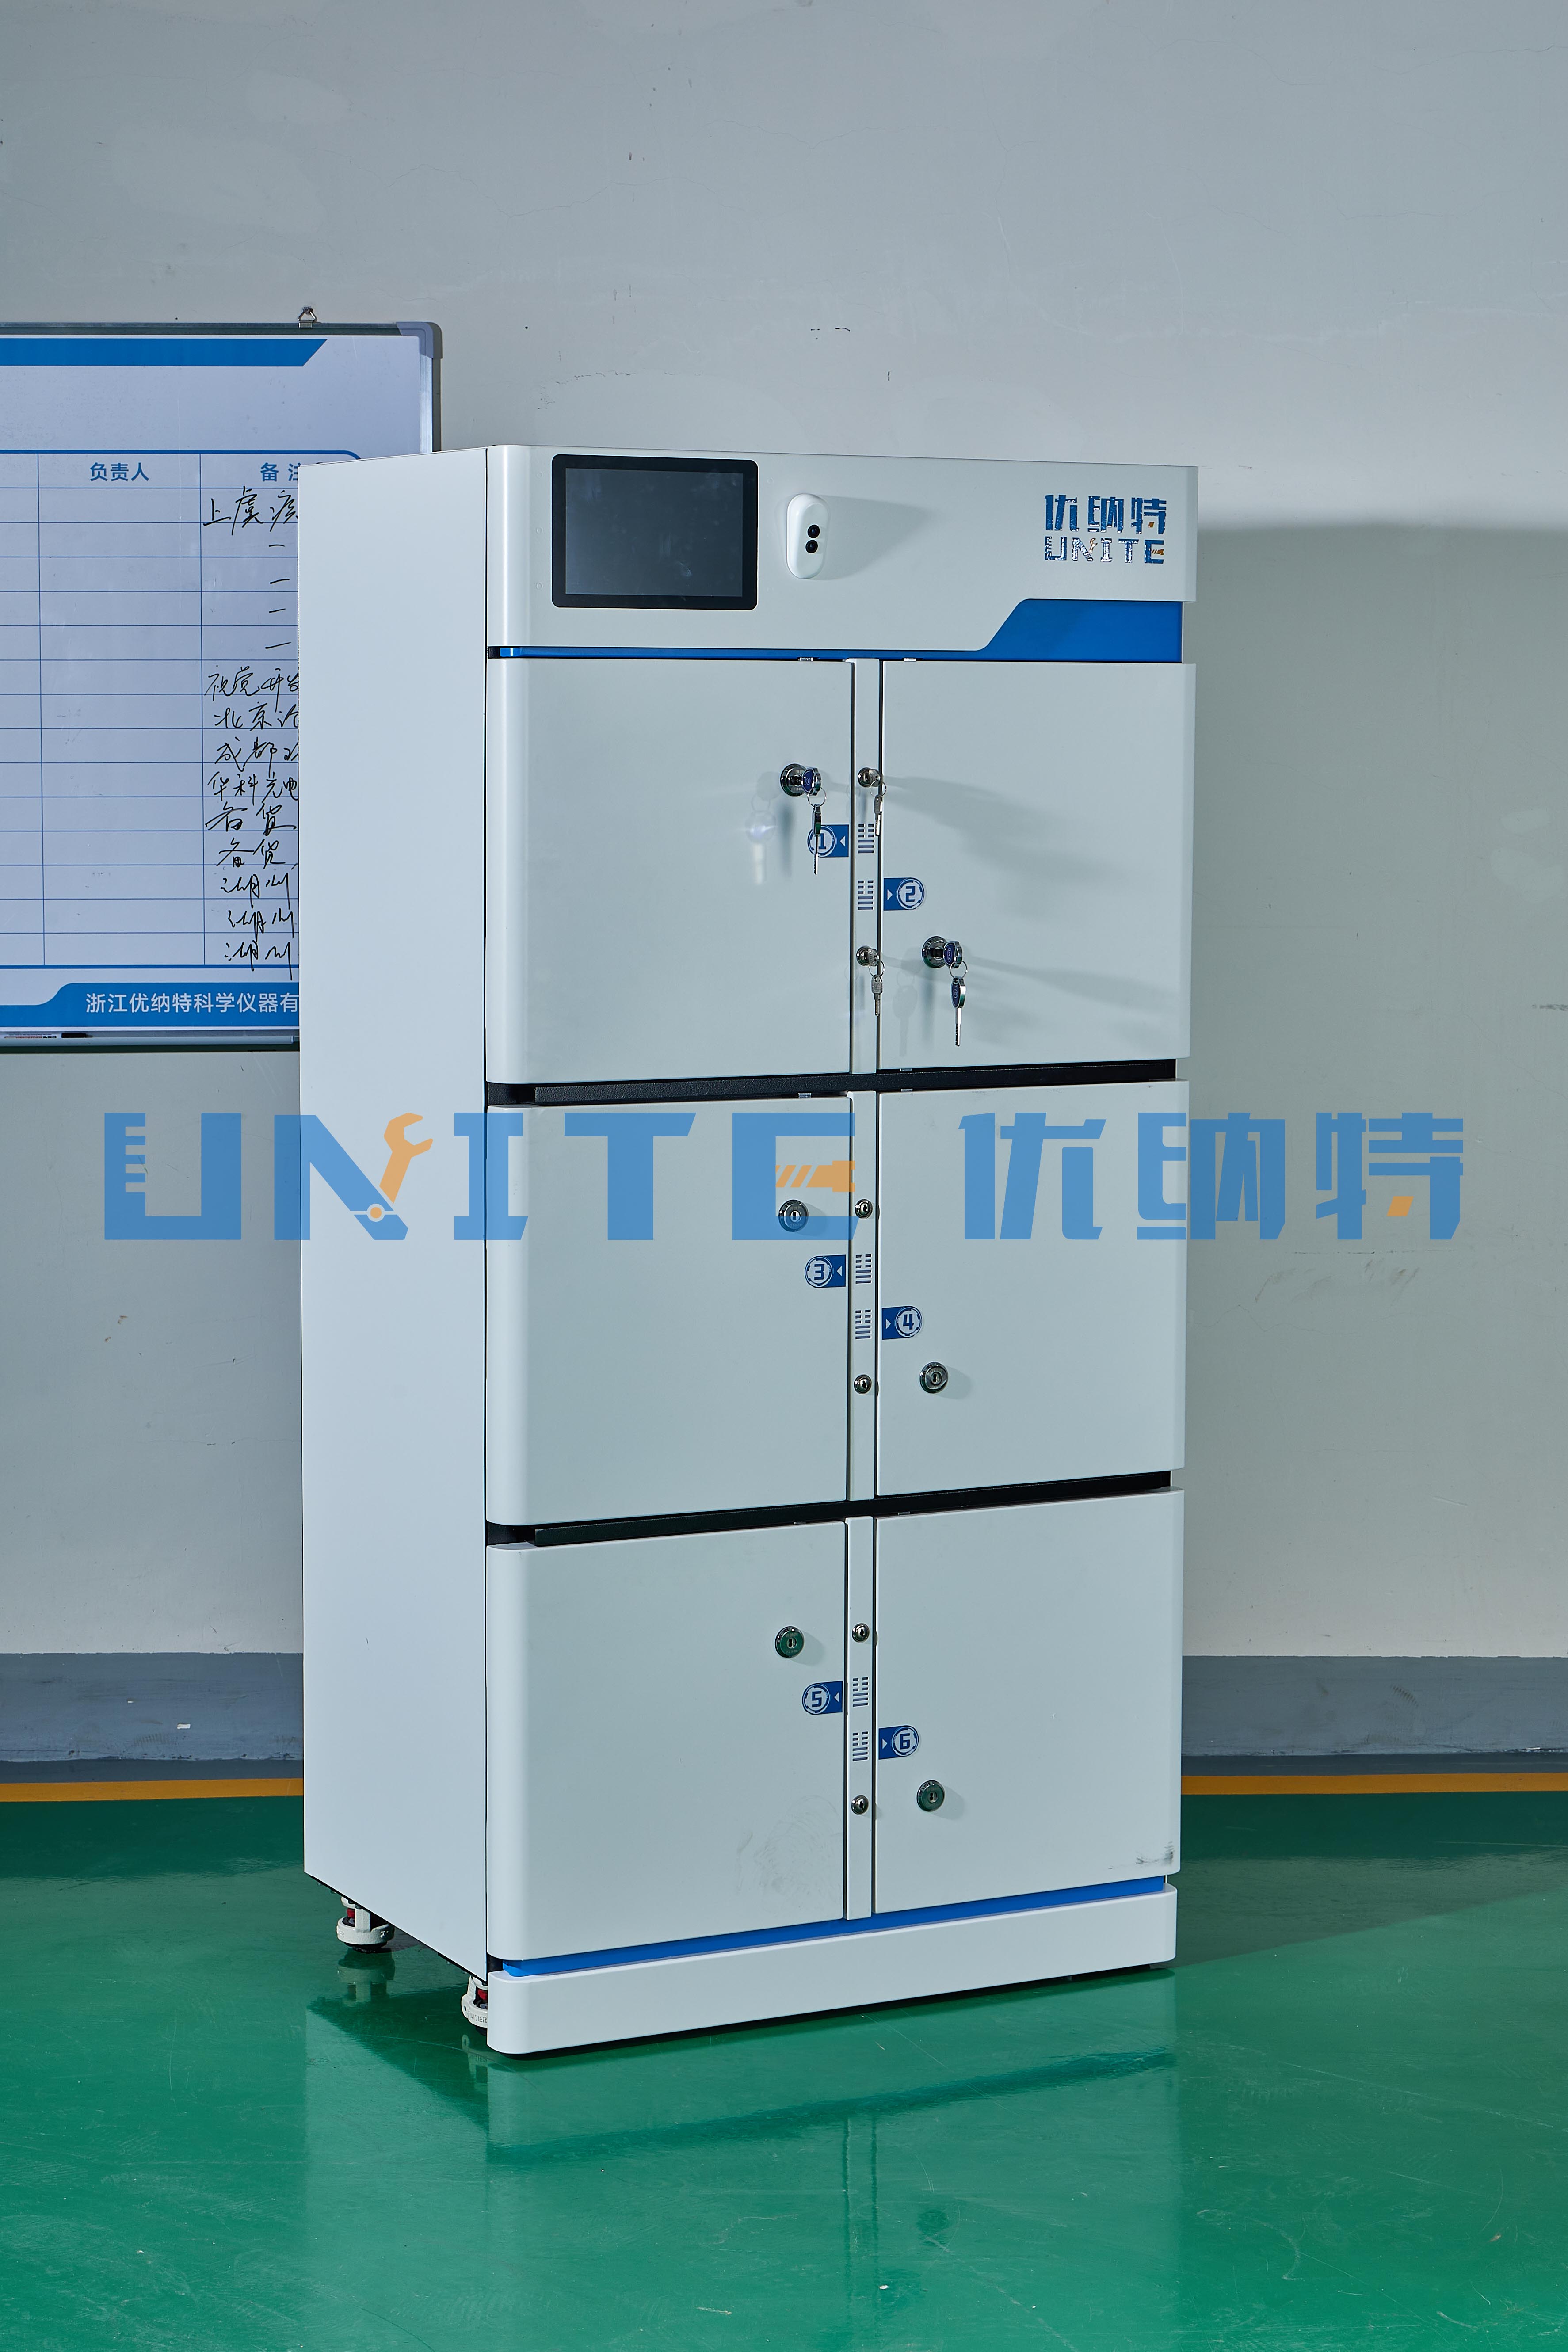 Unite Usample R6.2 Six-zone Matrix IOT Cabinets For Hazardous Chemicals Management with Partition Storage of 120+ Reagent Bottle